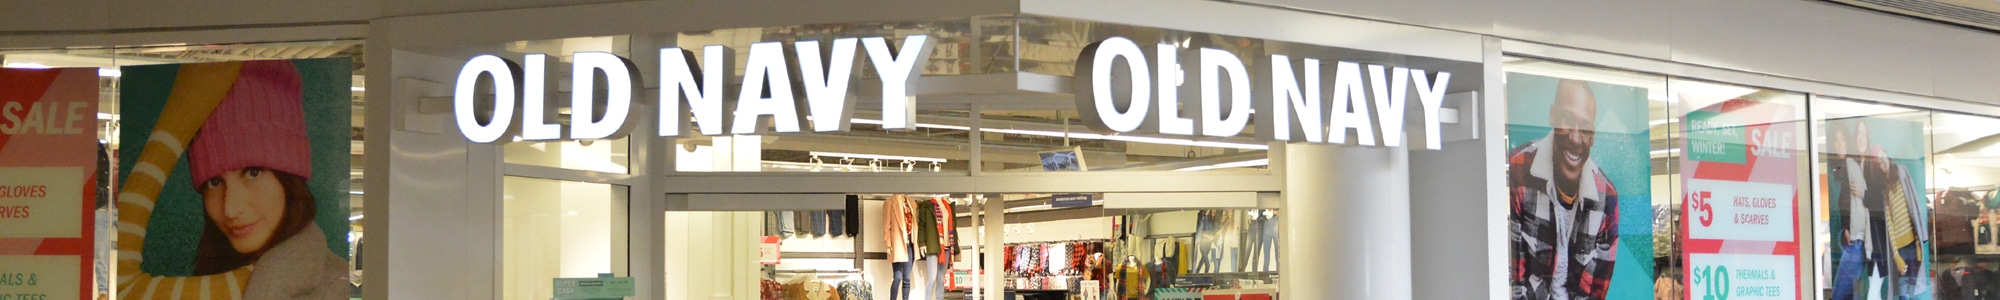 Old Navy banner image